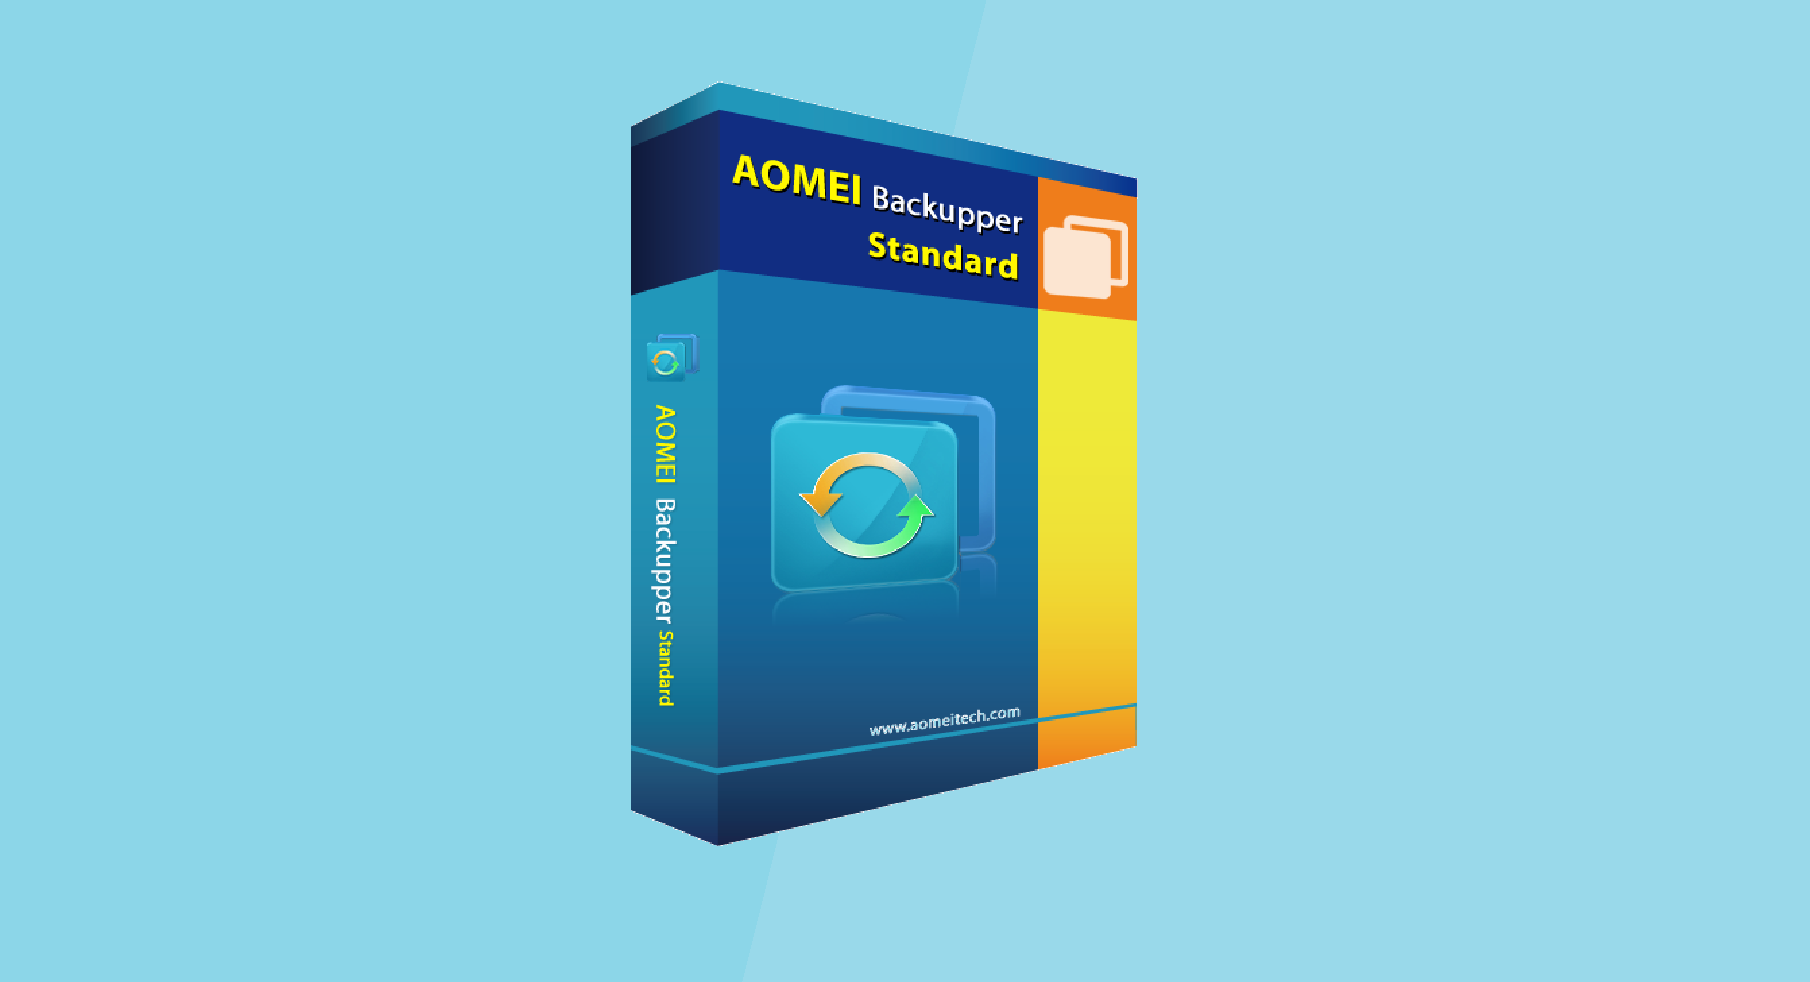 download the last version for ios AOMEI Backupper Professional 7.3.2